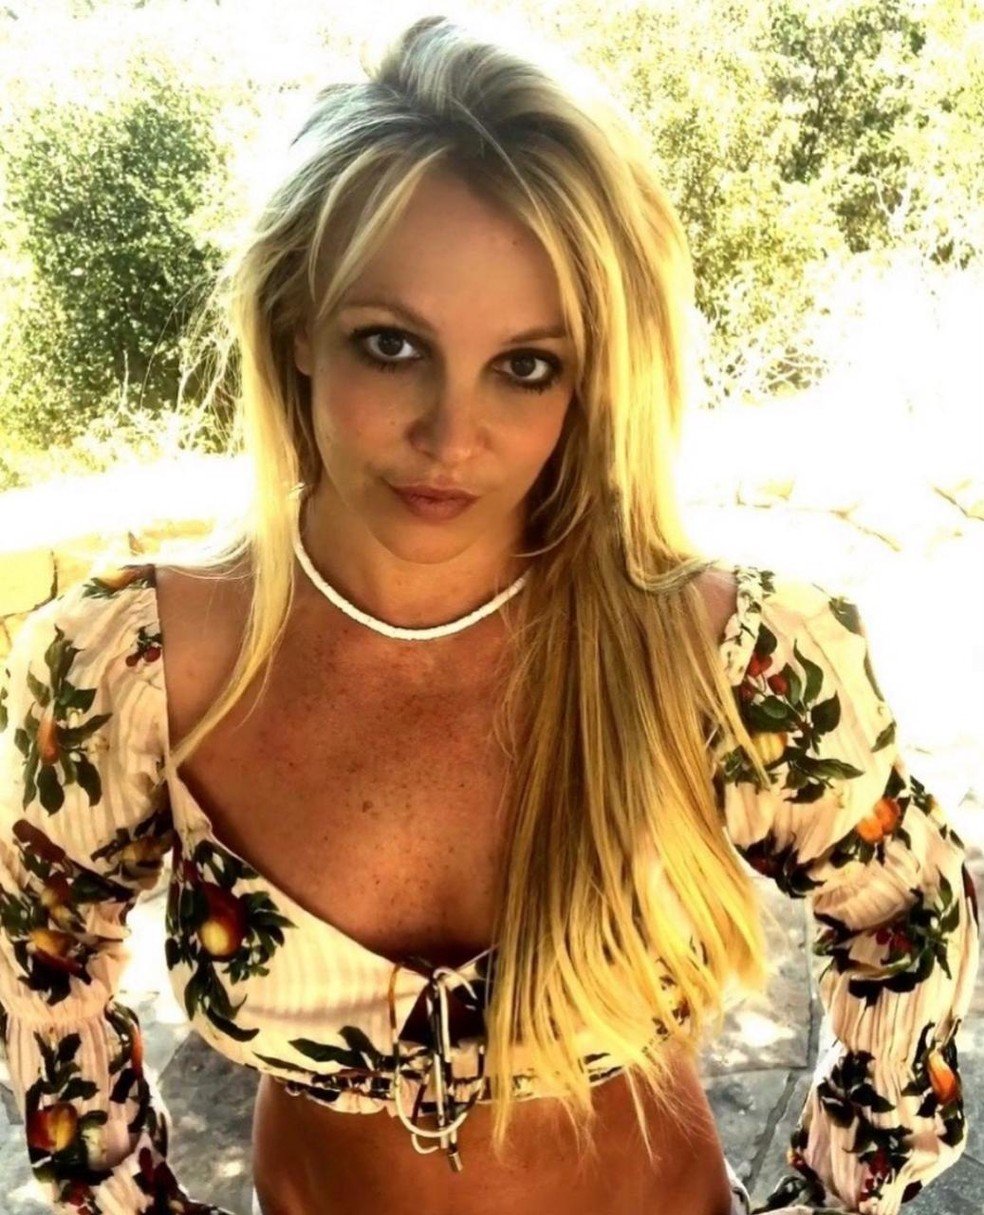 While Britney is on vacation, the court ruled not to release her - Her father remains her legal guardian